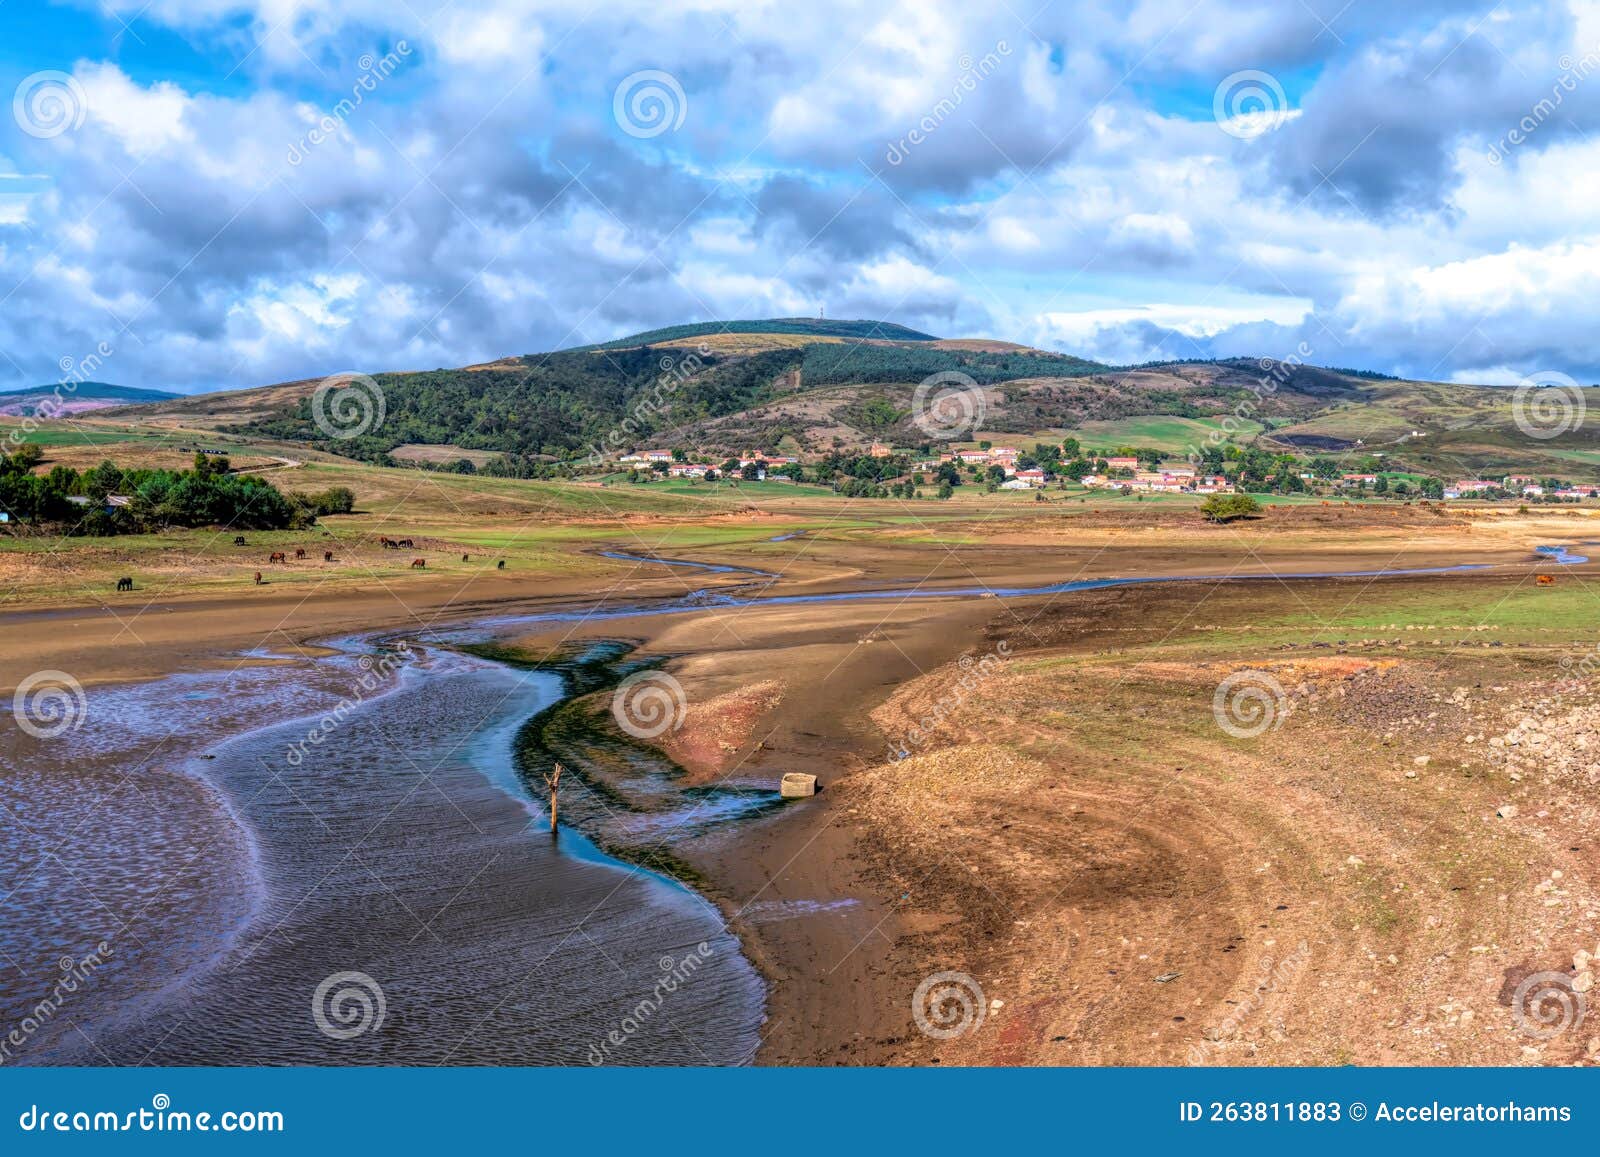 river ebro and spanish countryside with green fields and hills cantabria, spain